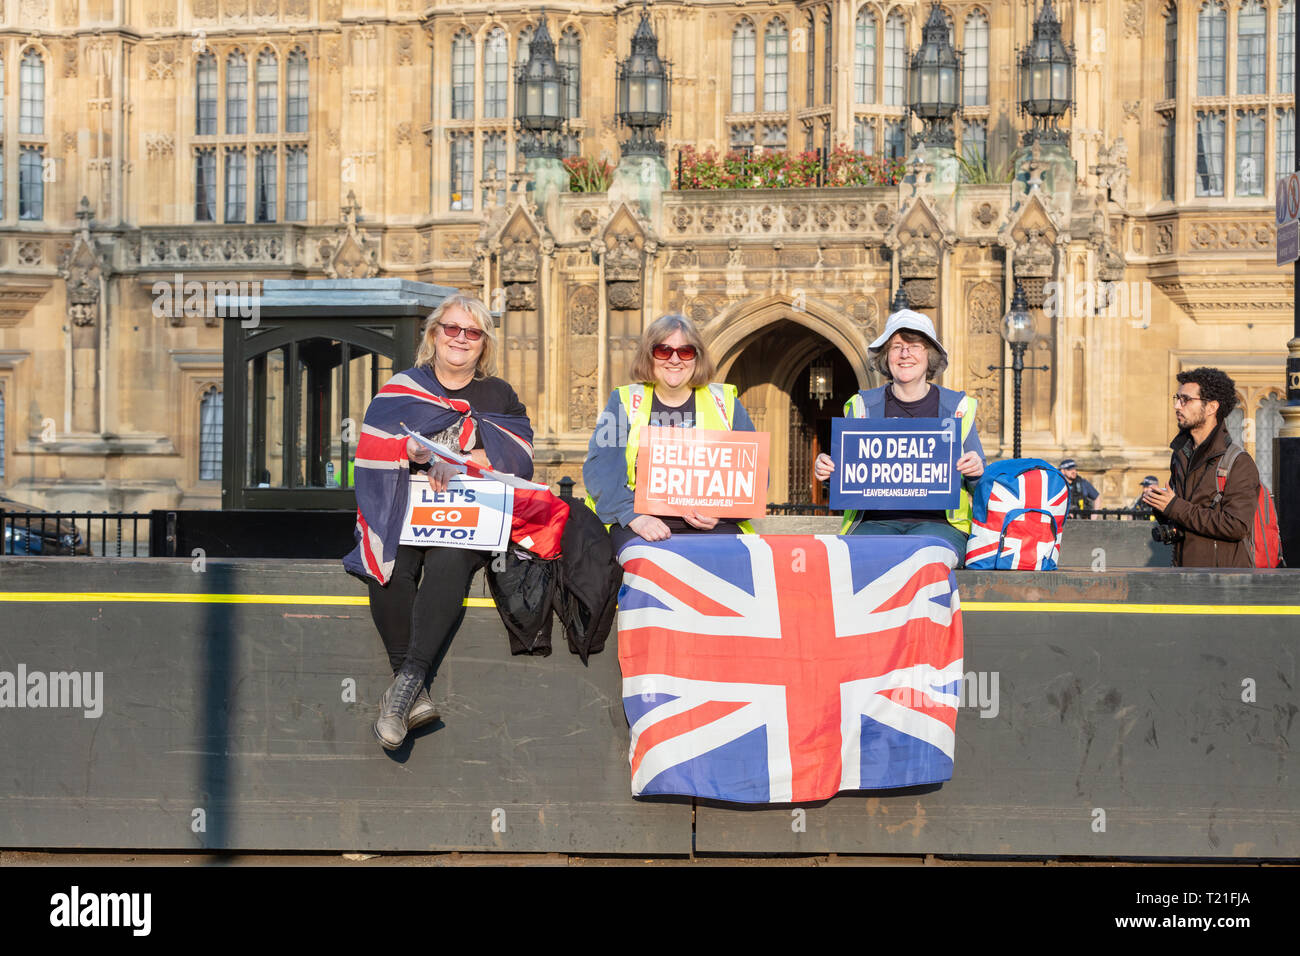 London, UK; 29th March 2019; Three Female Pro-Brexit Demonstrators Sit on Security Barrier Outside Parliament Holding Pro-Brexit Signs and union Jack Flag. Stock Photo